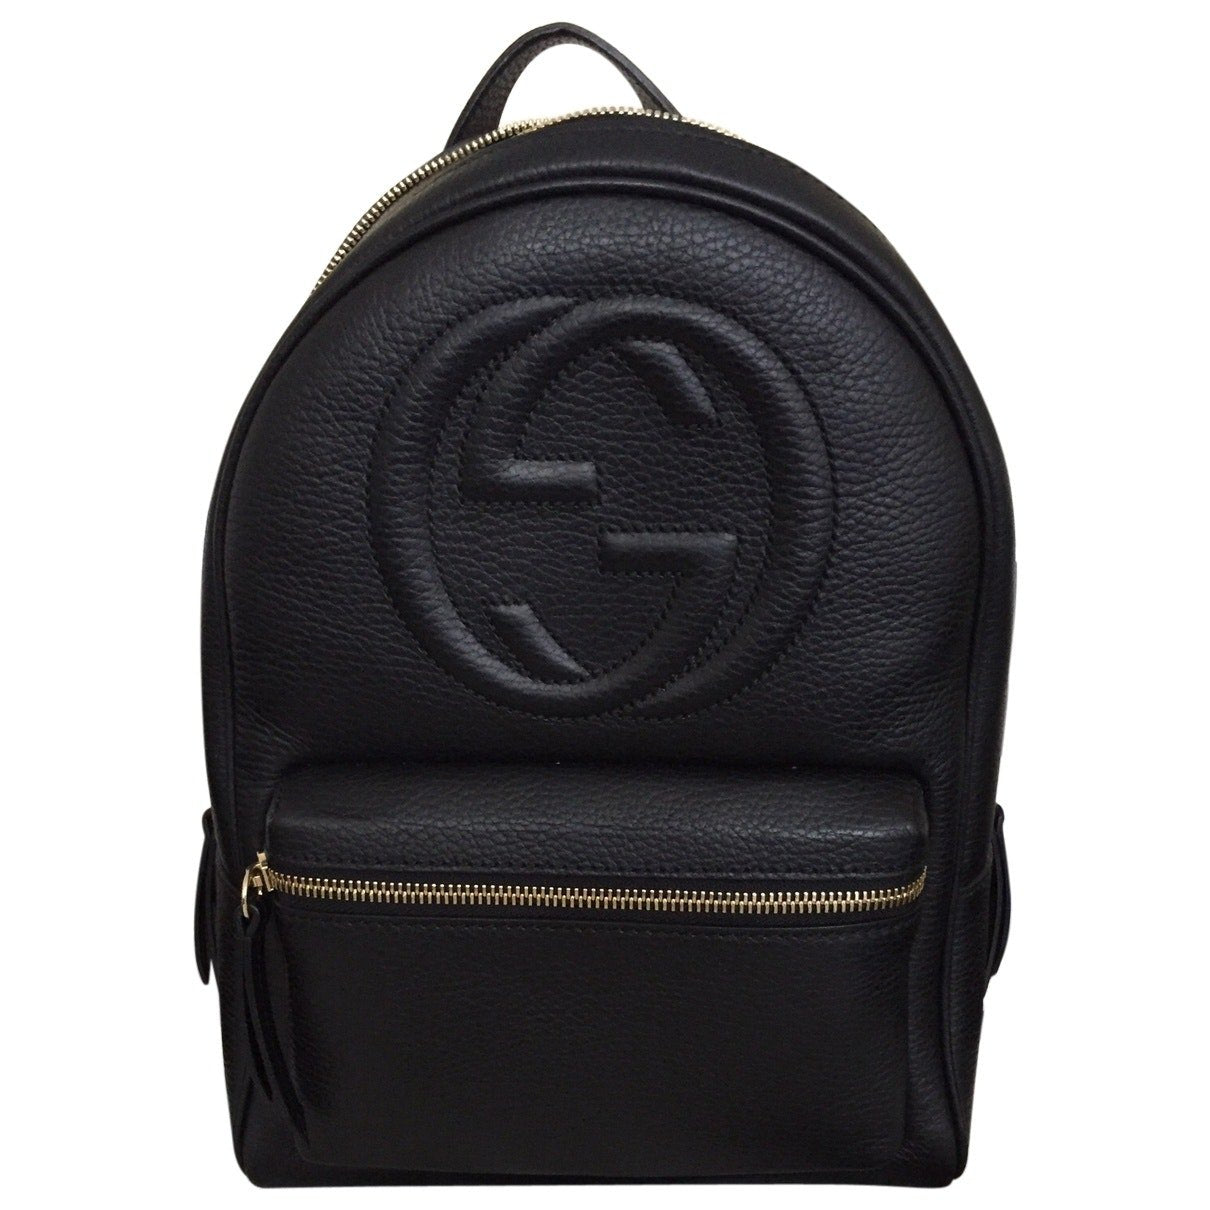 Gucci Soho Black Backpack Calf Leather Backpack Ladies Bag Italy